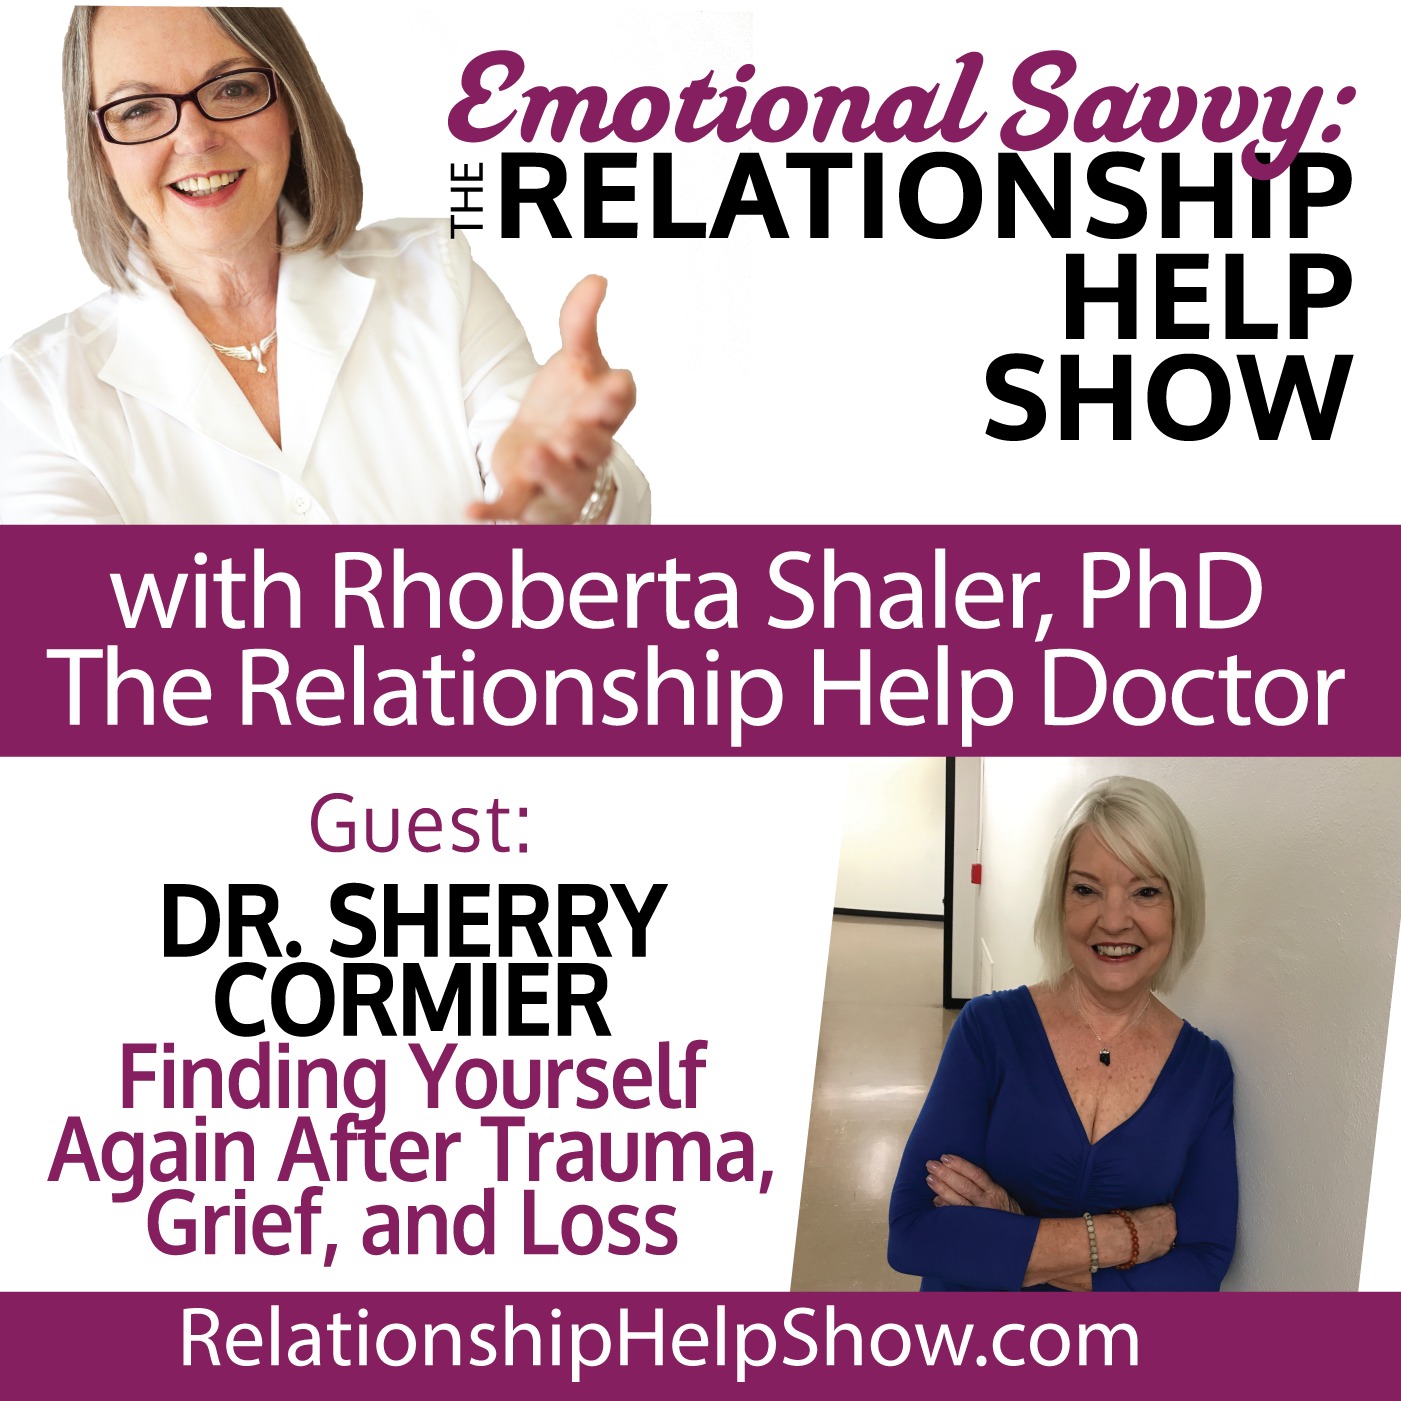 Finding Yourself Again After Trauma, Grief & Loss  GUEST: Dr. Sherry Cormier